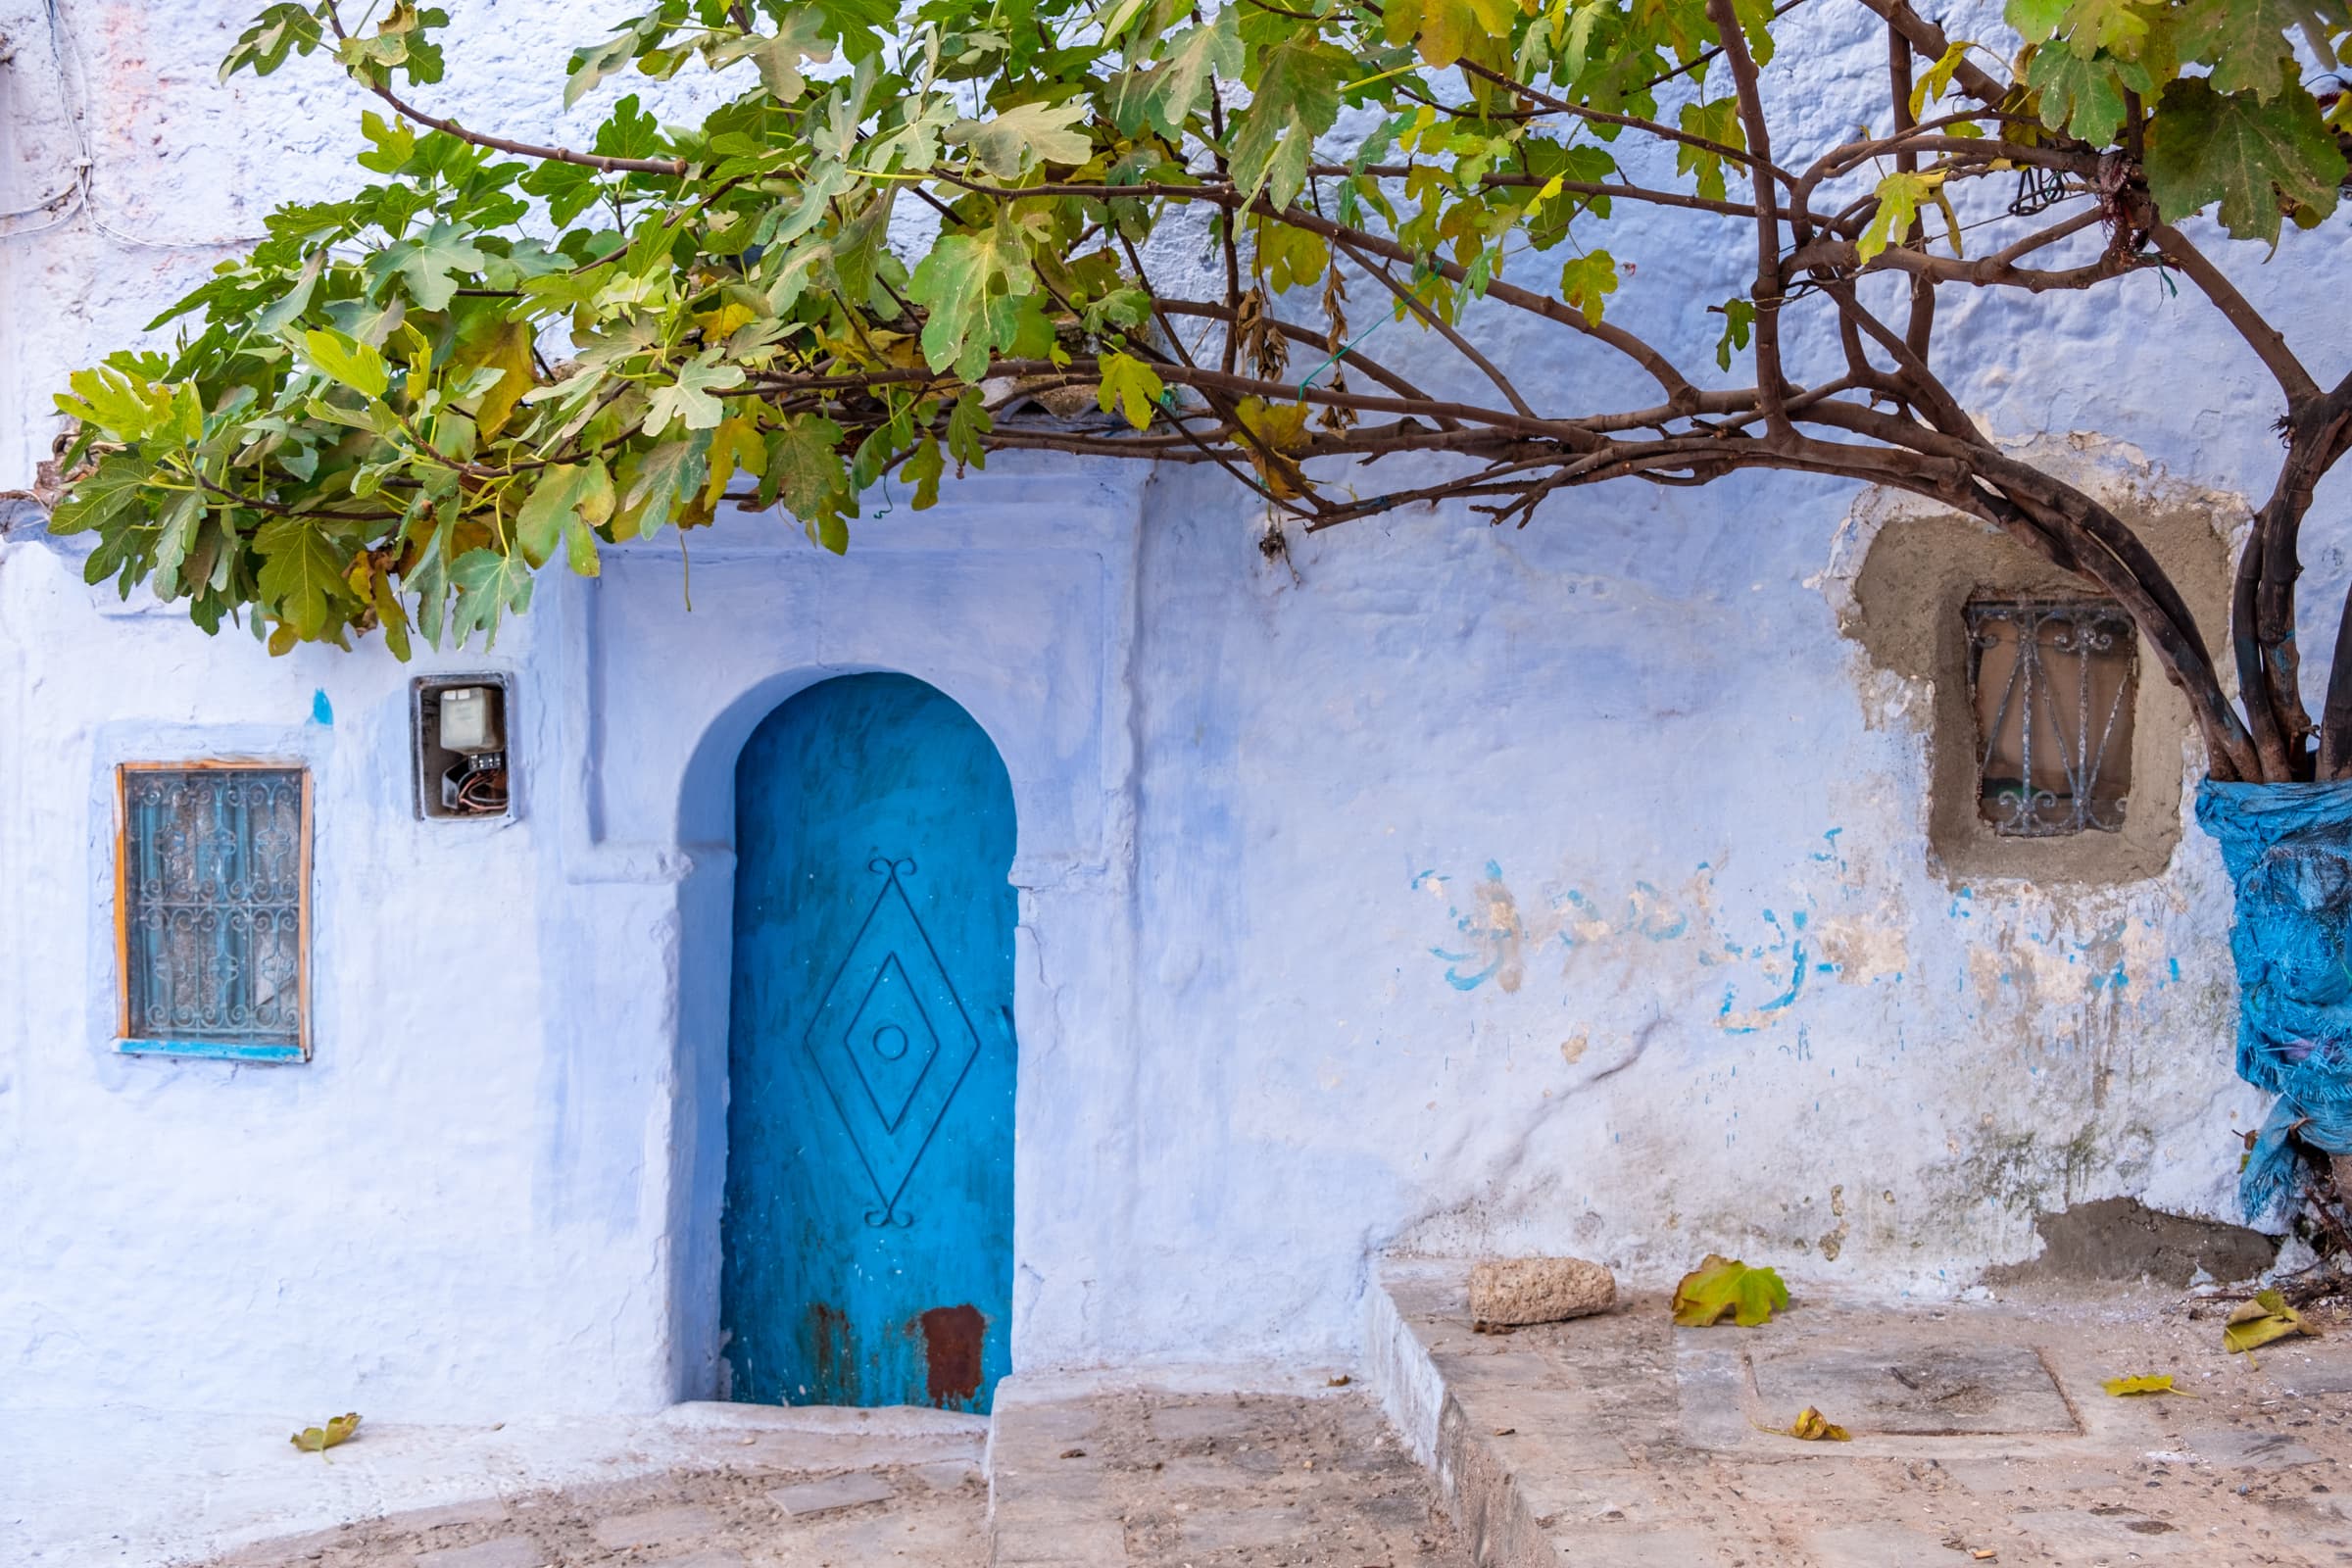 A medieval doorway and old tree, Chefchaouen, Morocco